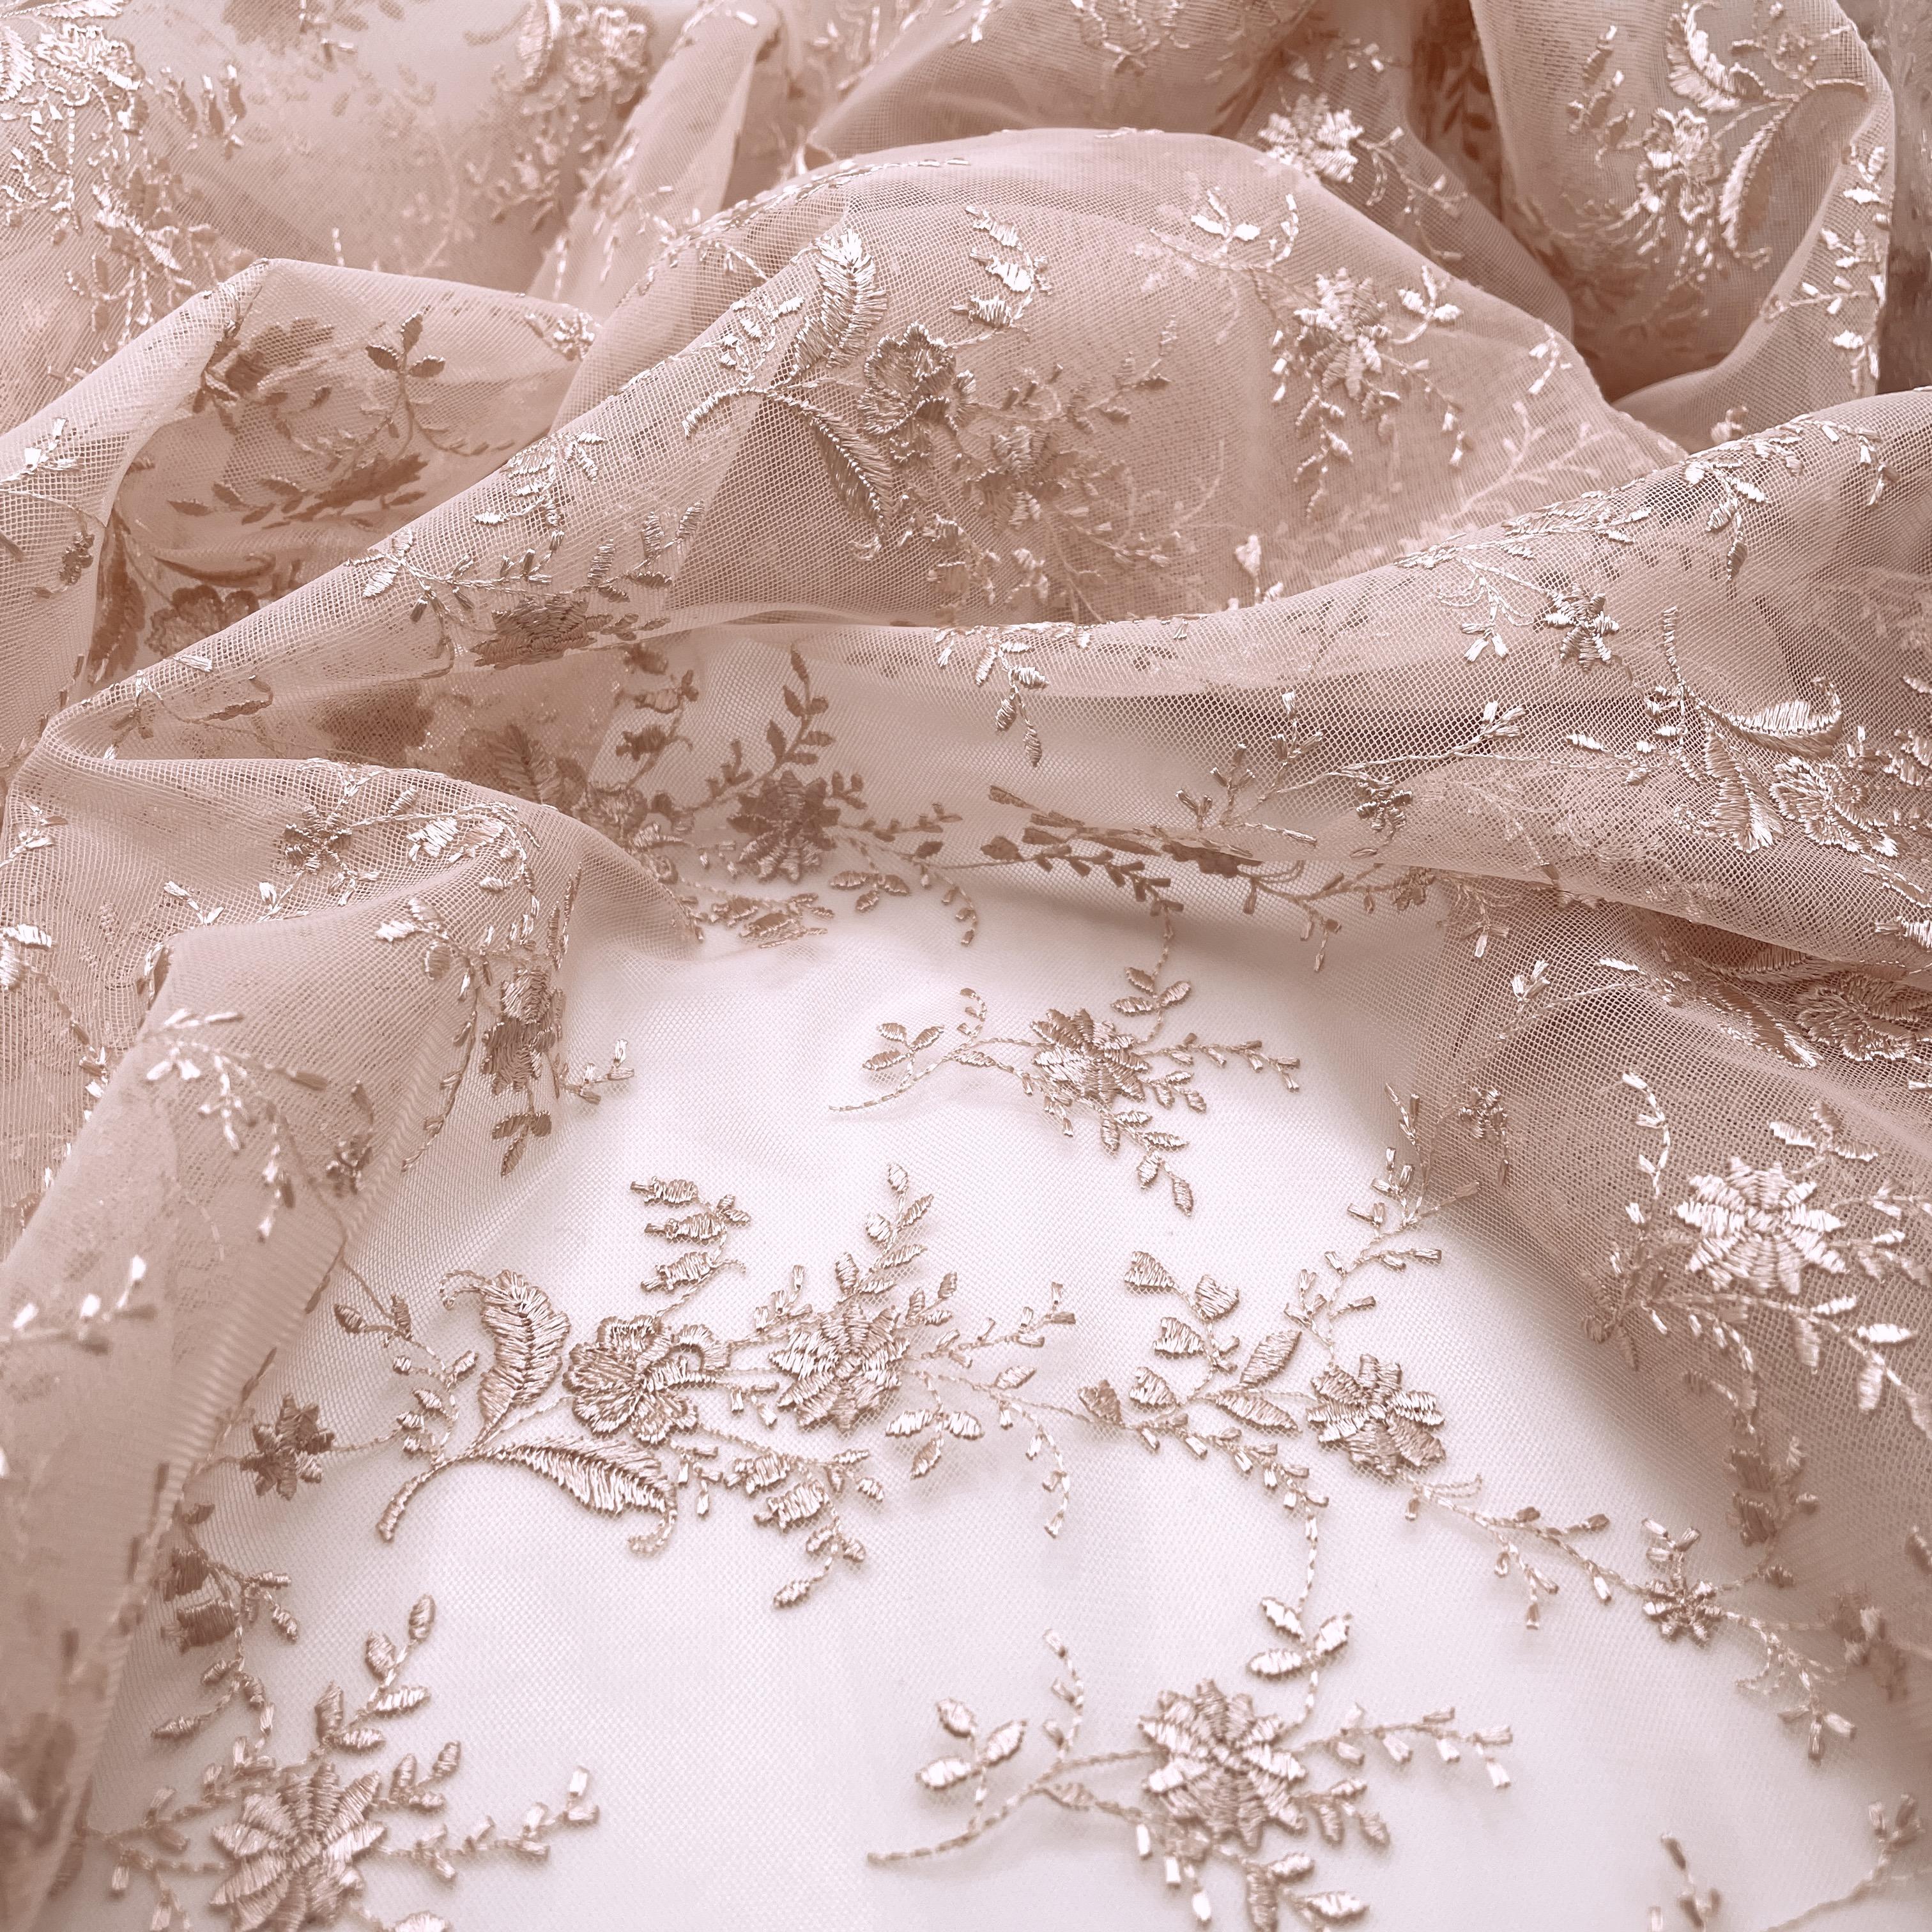 https://cdn.ecommercedns.uk/files/6/235836/4/17948534/light-salmon-pink-allover-voile-lace-with-give.jpg